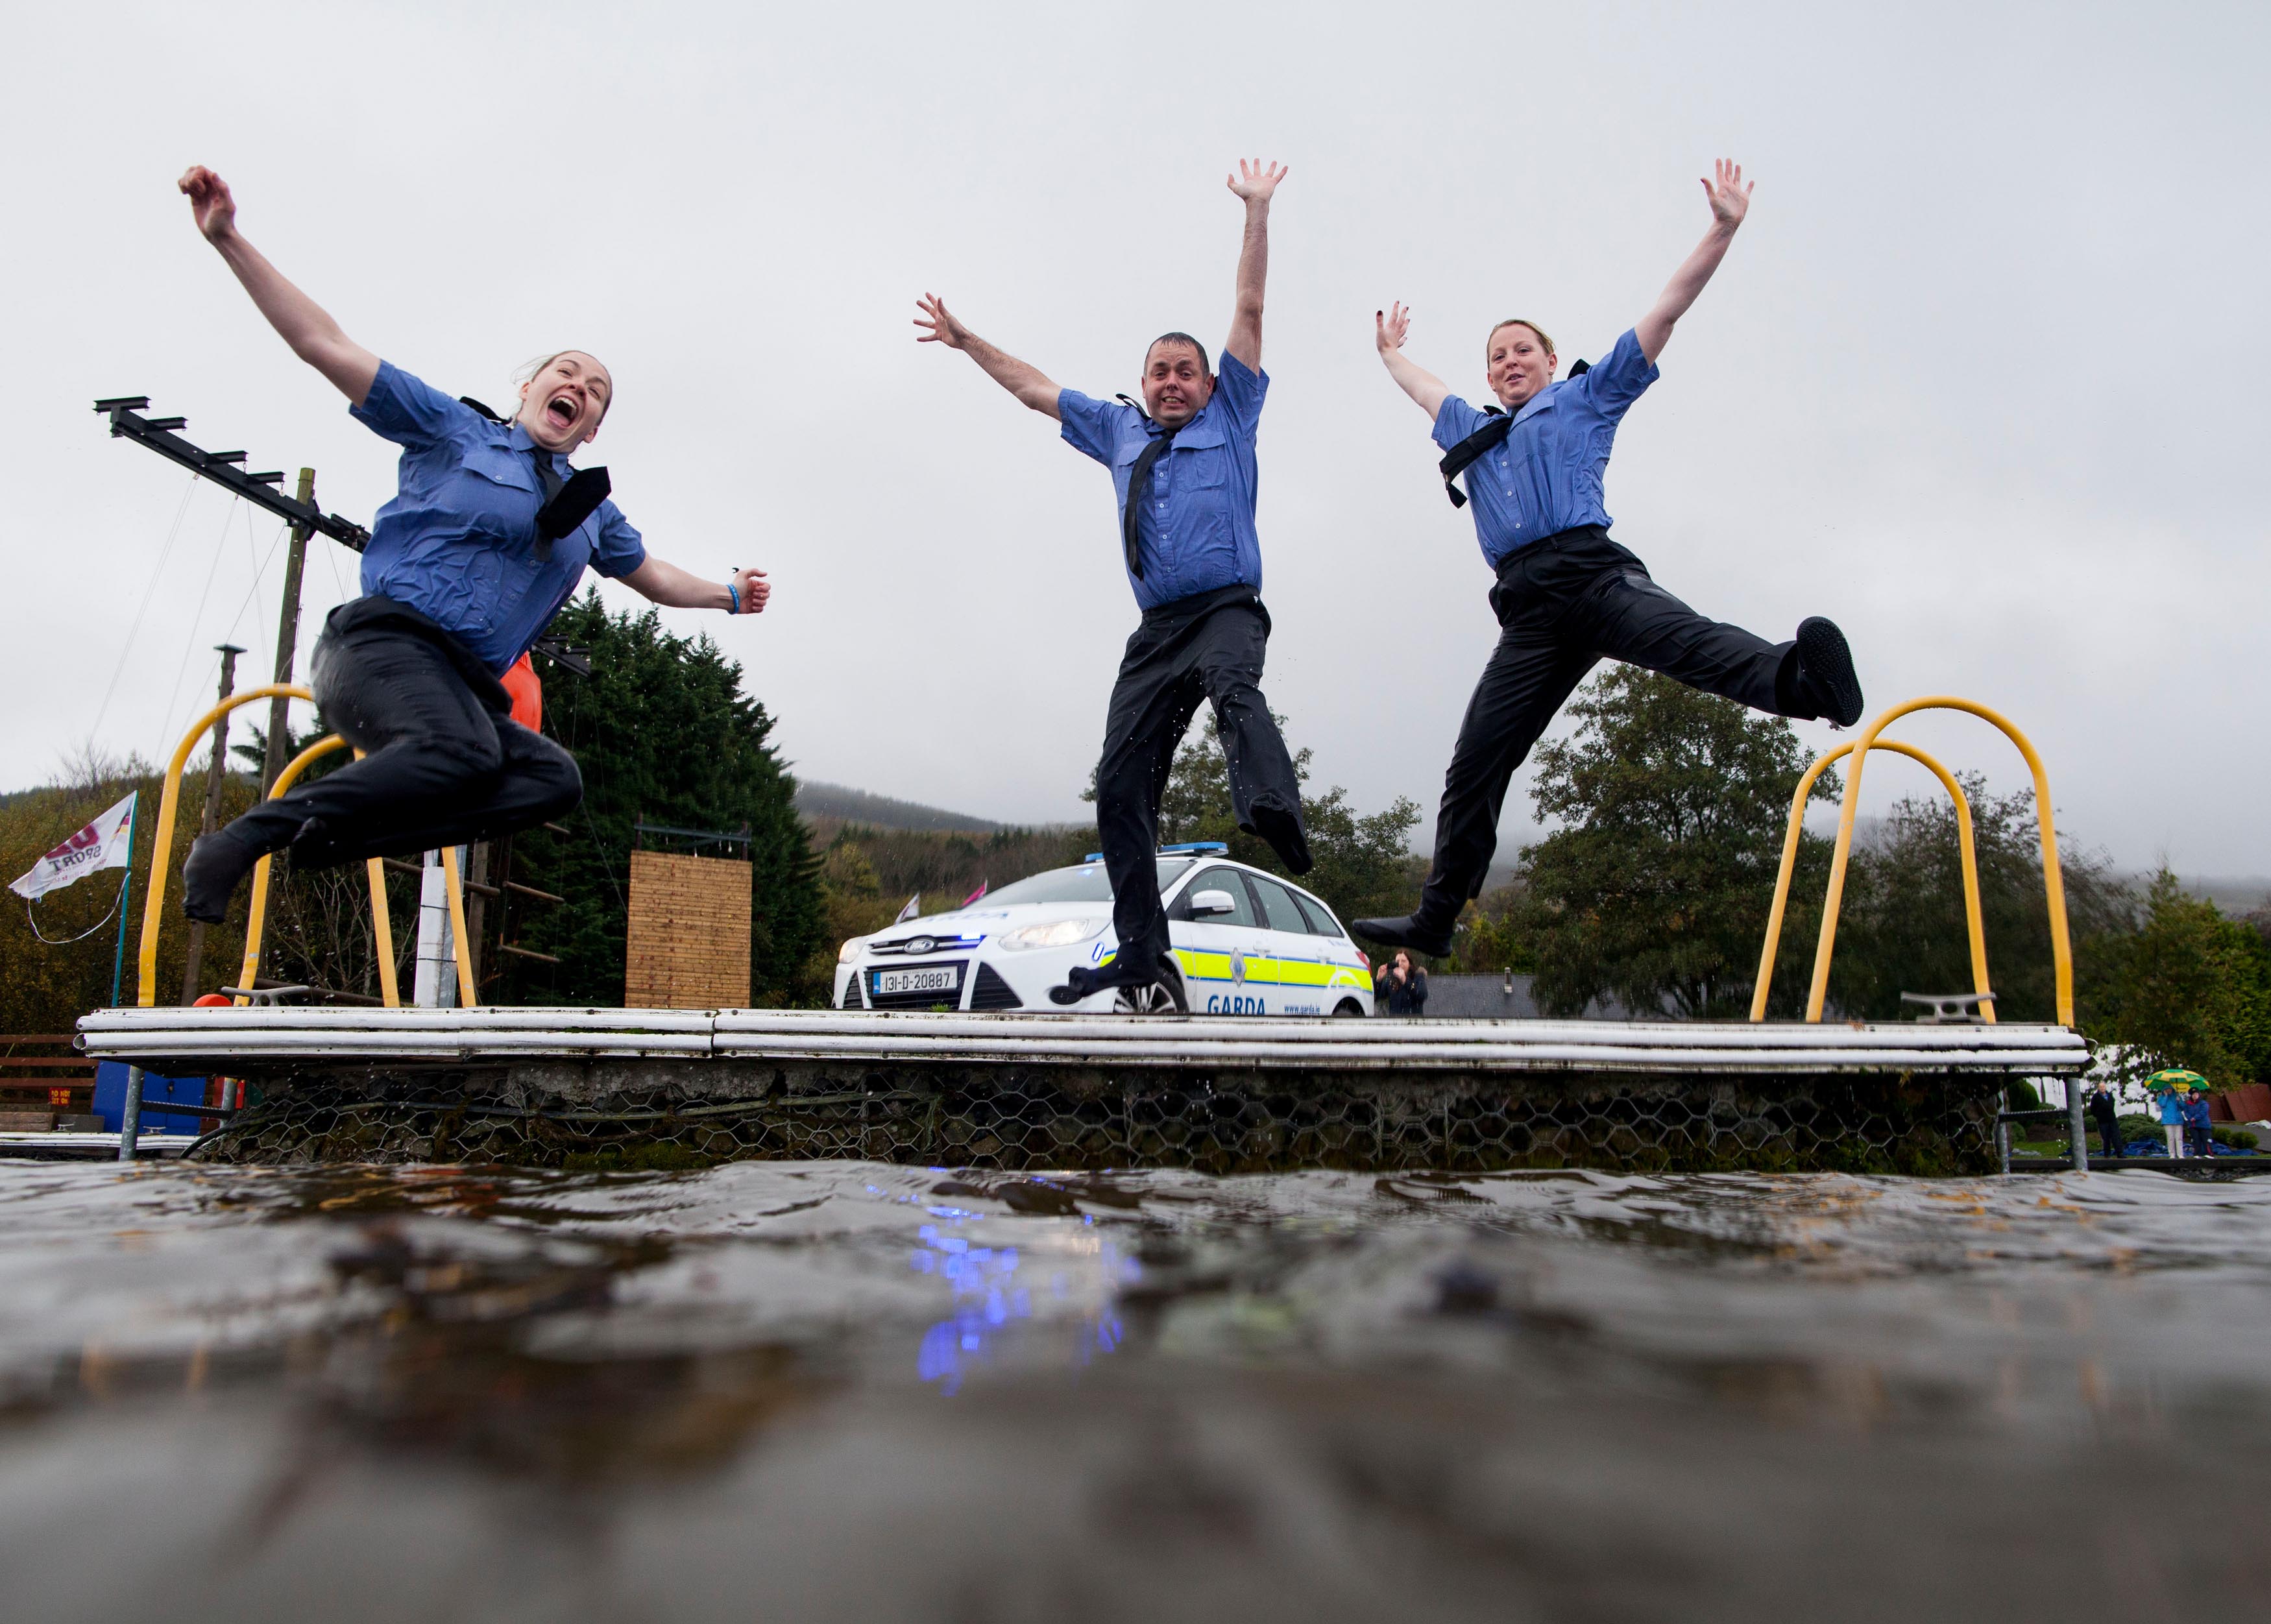 Gardai Urge Public to Help Raise €10k for Special Olympics with Polar Plunge